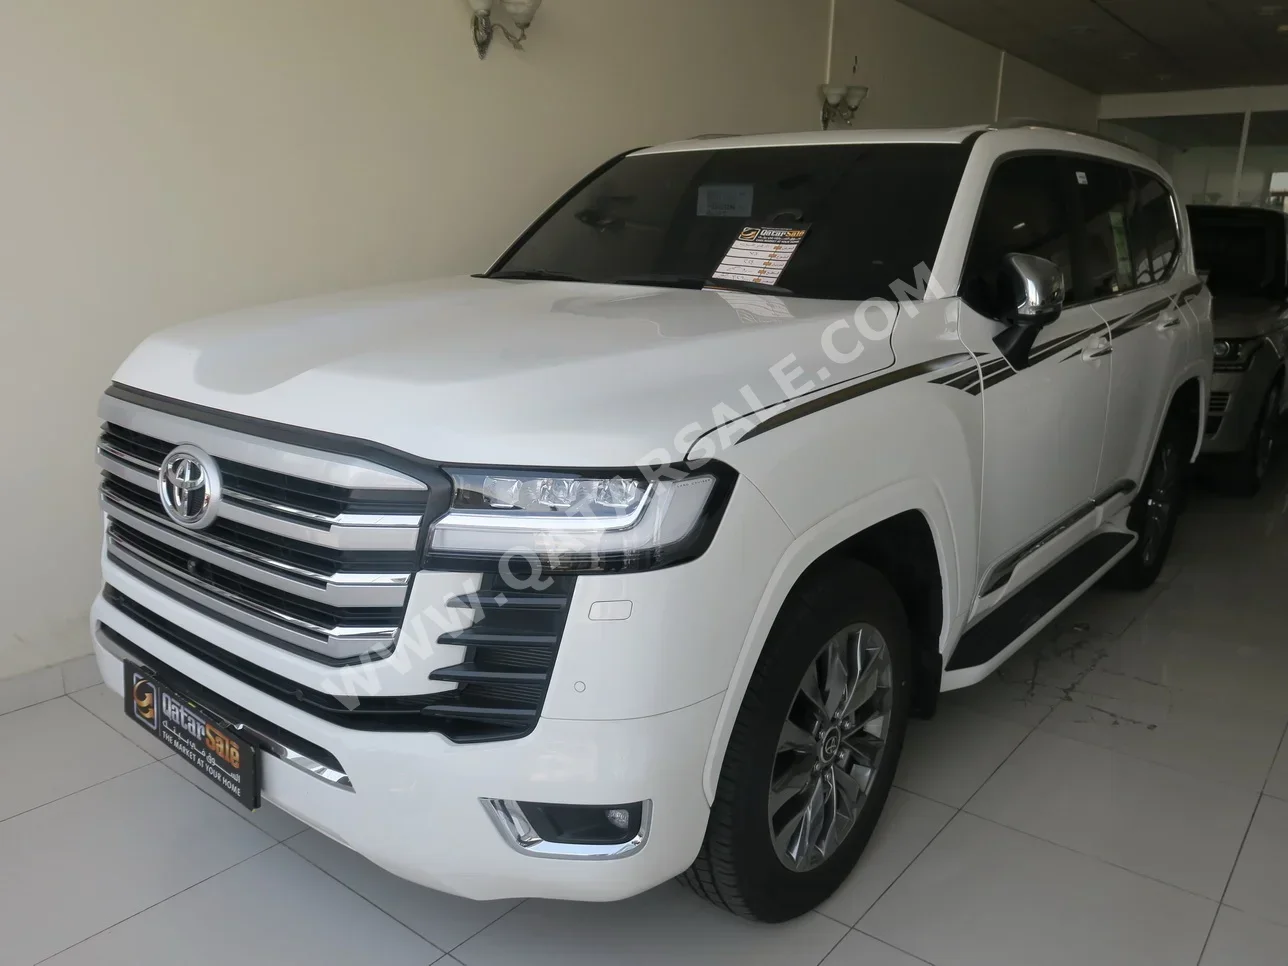 Toyota  Land Cruiser  VX Twin Turbo  2024  Automatic  8,000 Km  6 Cylinder  Four Wheel Drive (4WD)  SUV  White  With Warranty